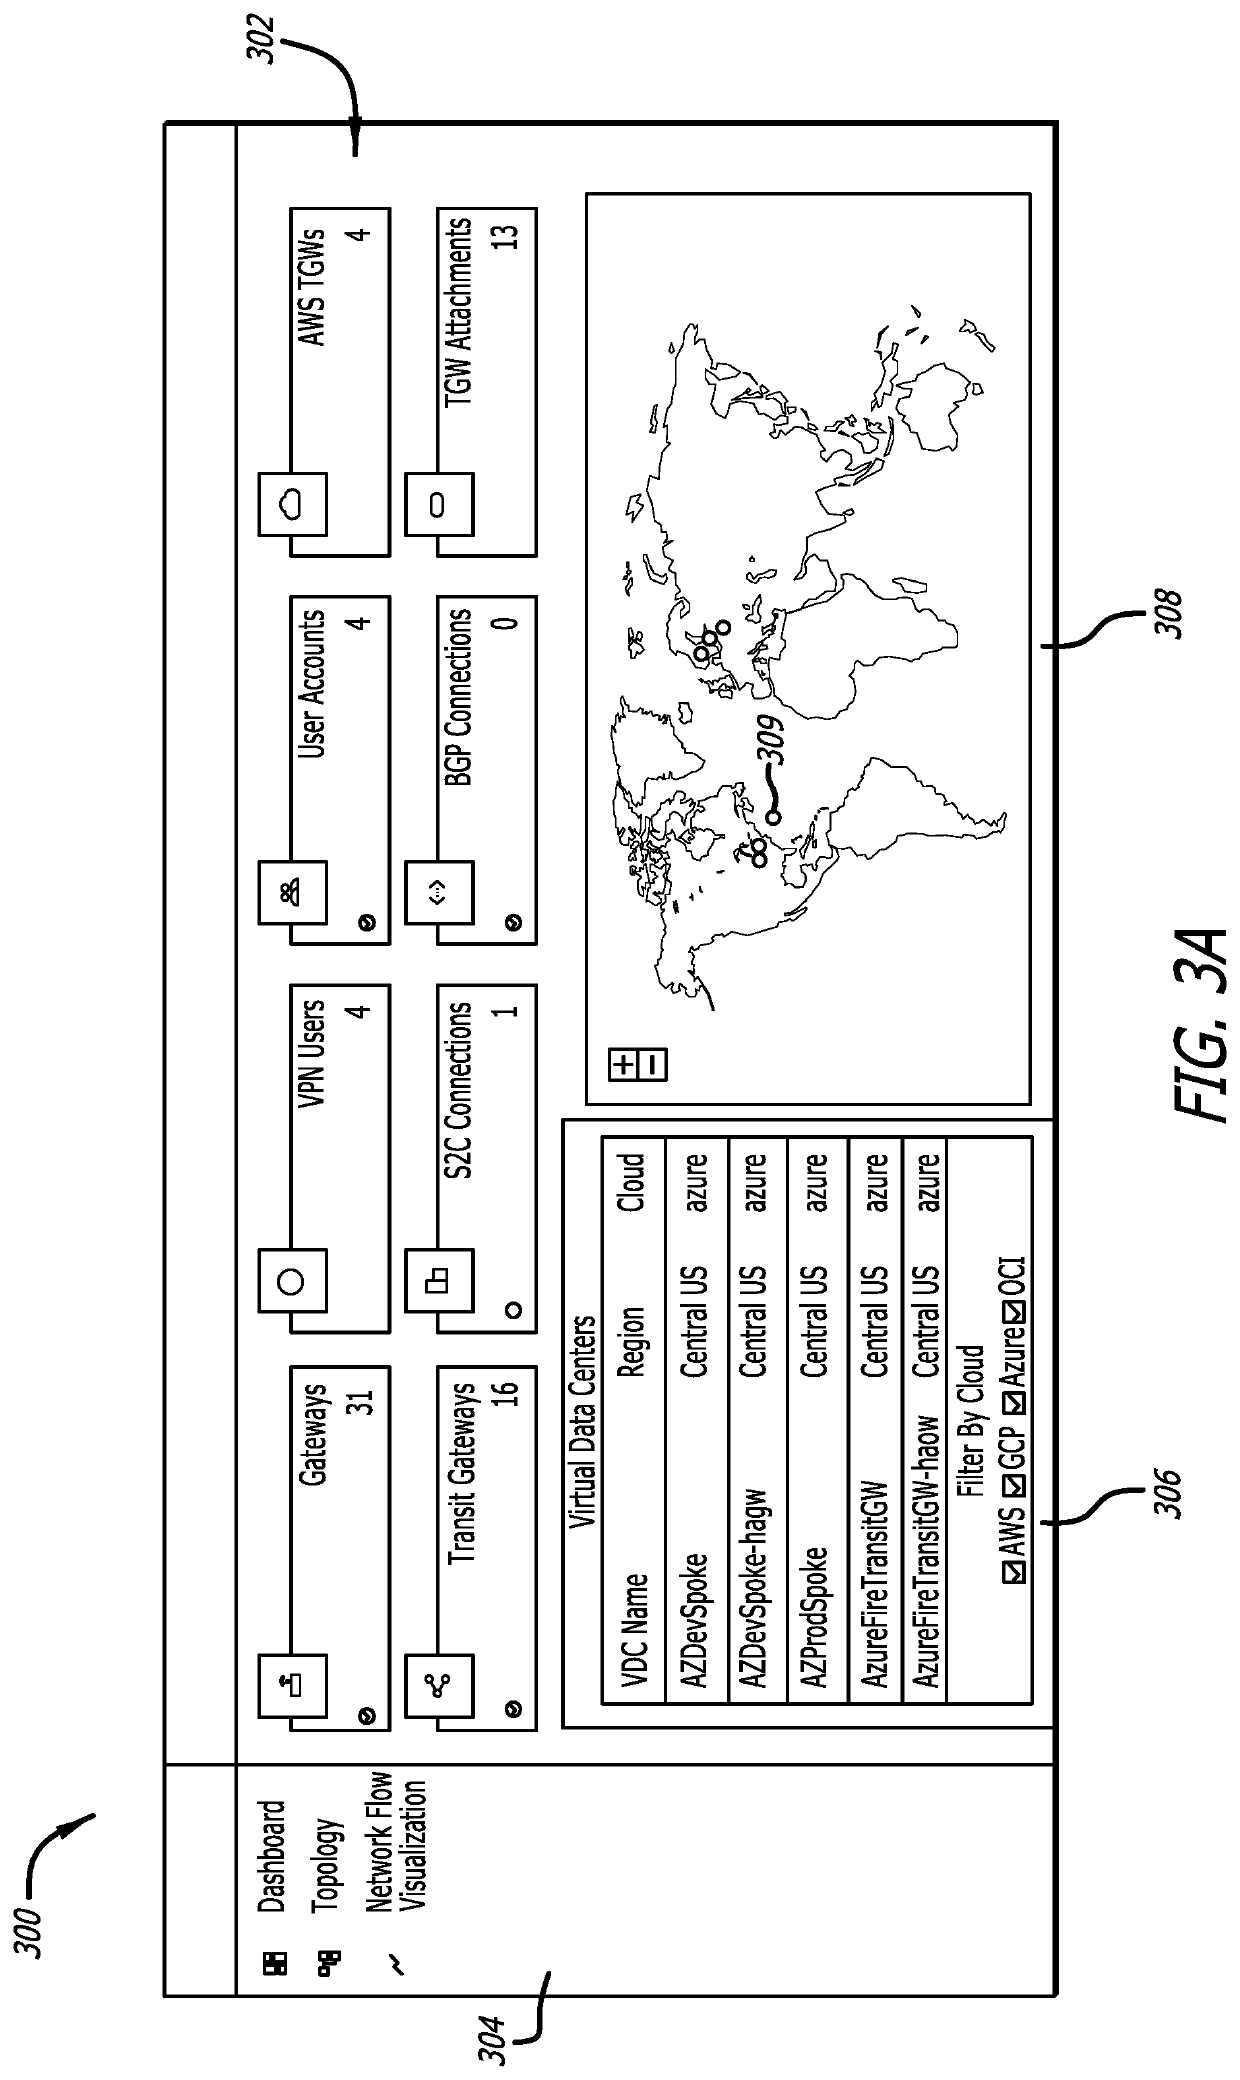 Systems and methods for deploying a cloud management system configured for tagging constructs deployed in a multi-cloud environment